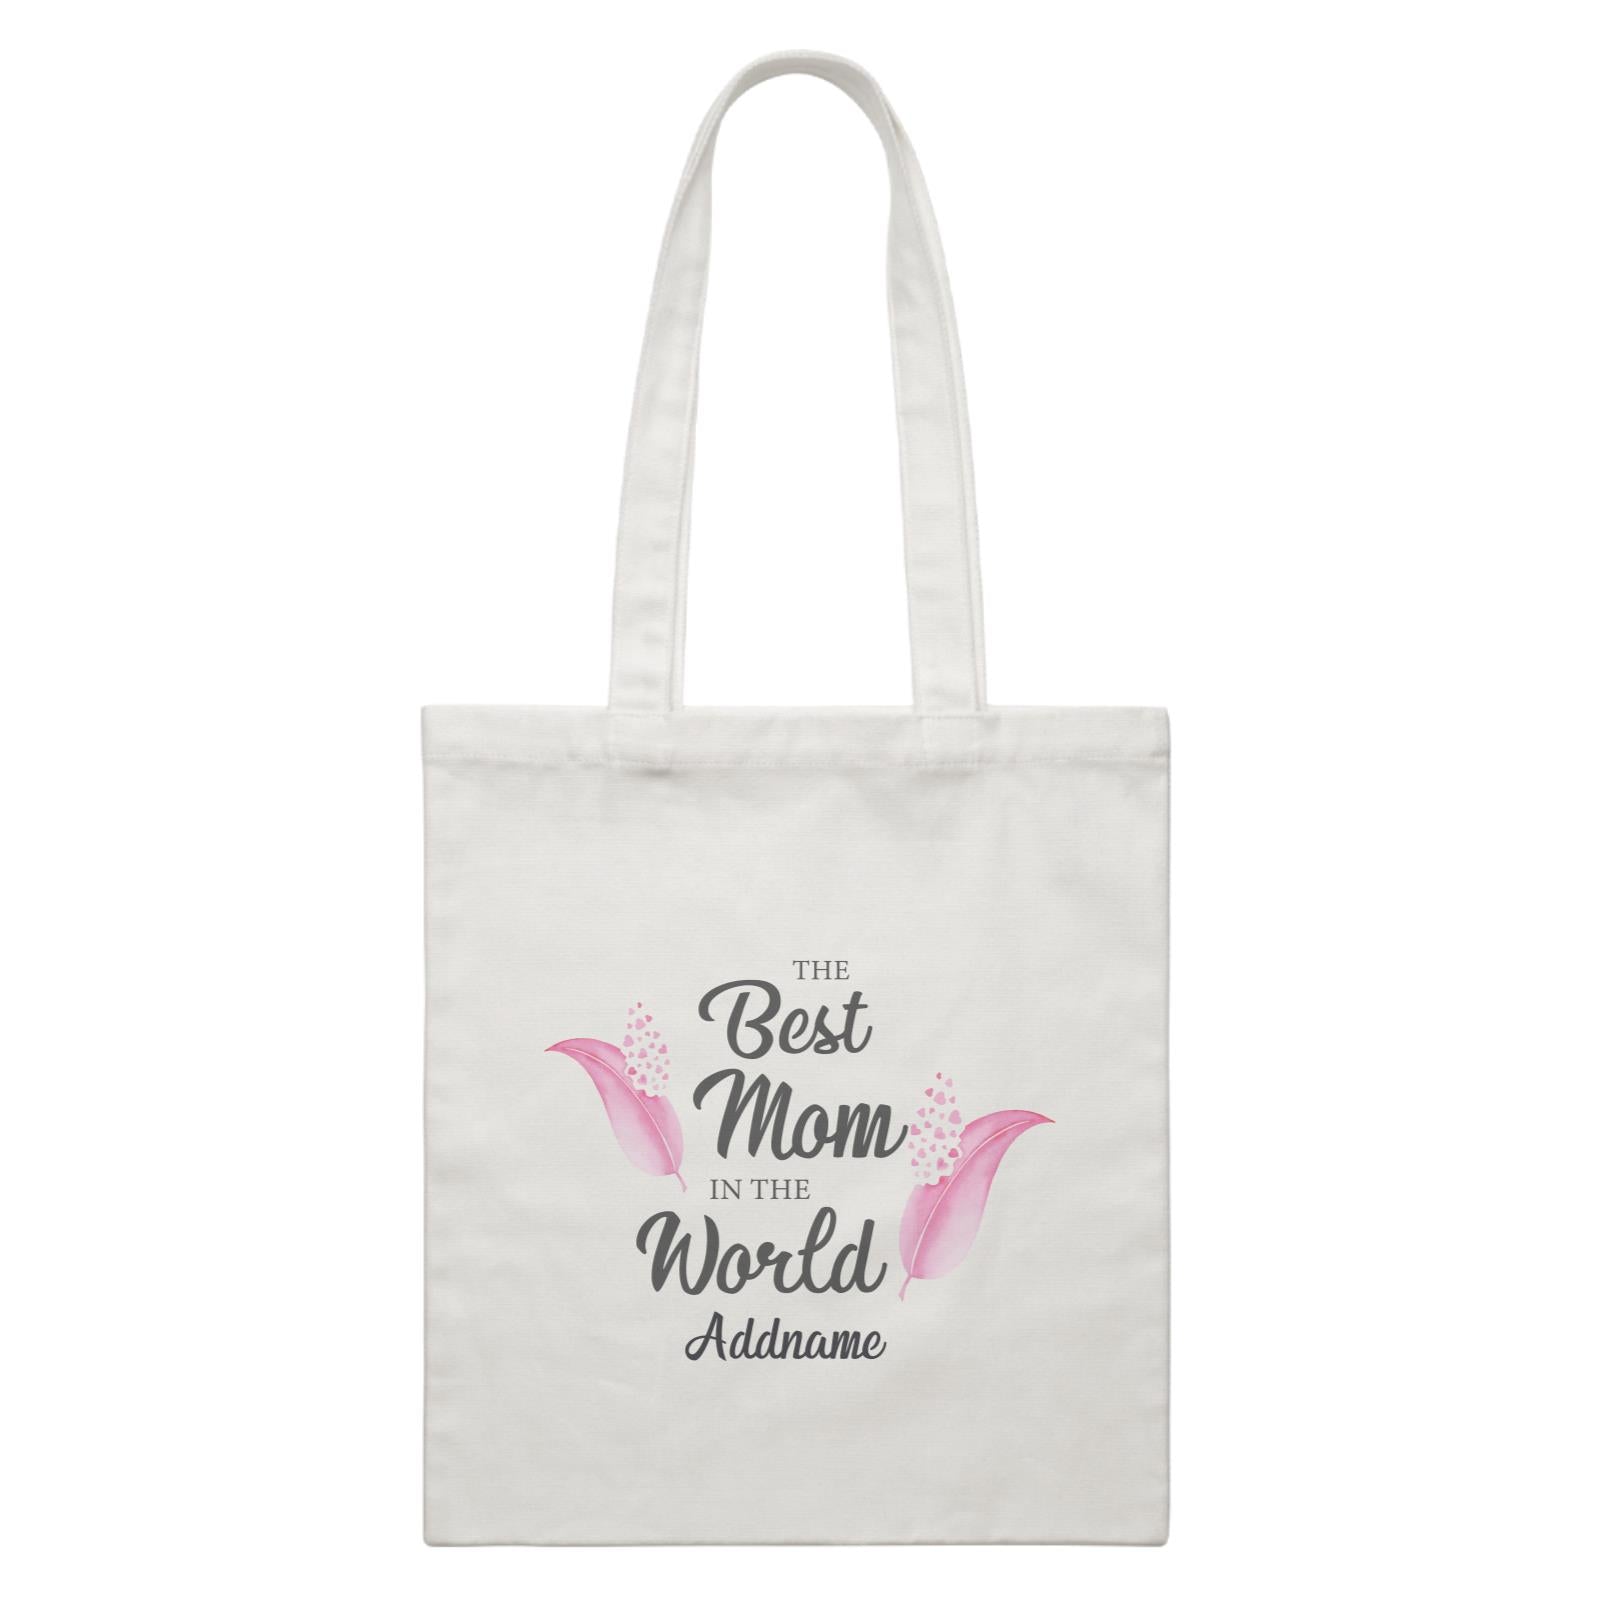 Sweet Mom Quotes 1 Love Feathers The Best Mom In The World Addname Accessories White Canvas Bag